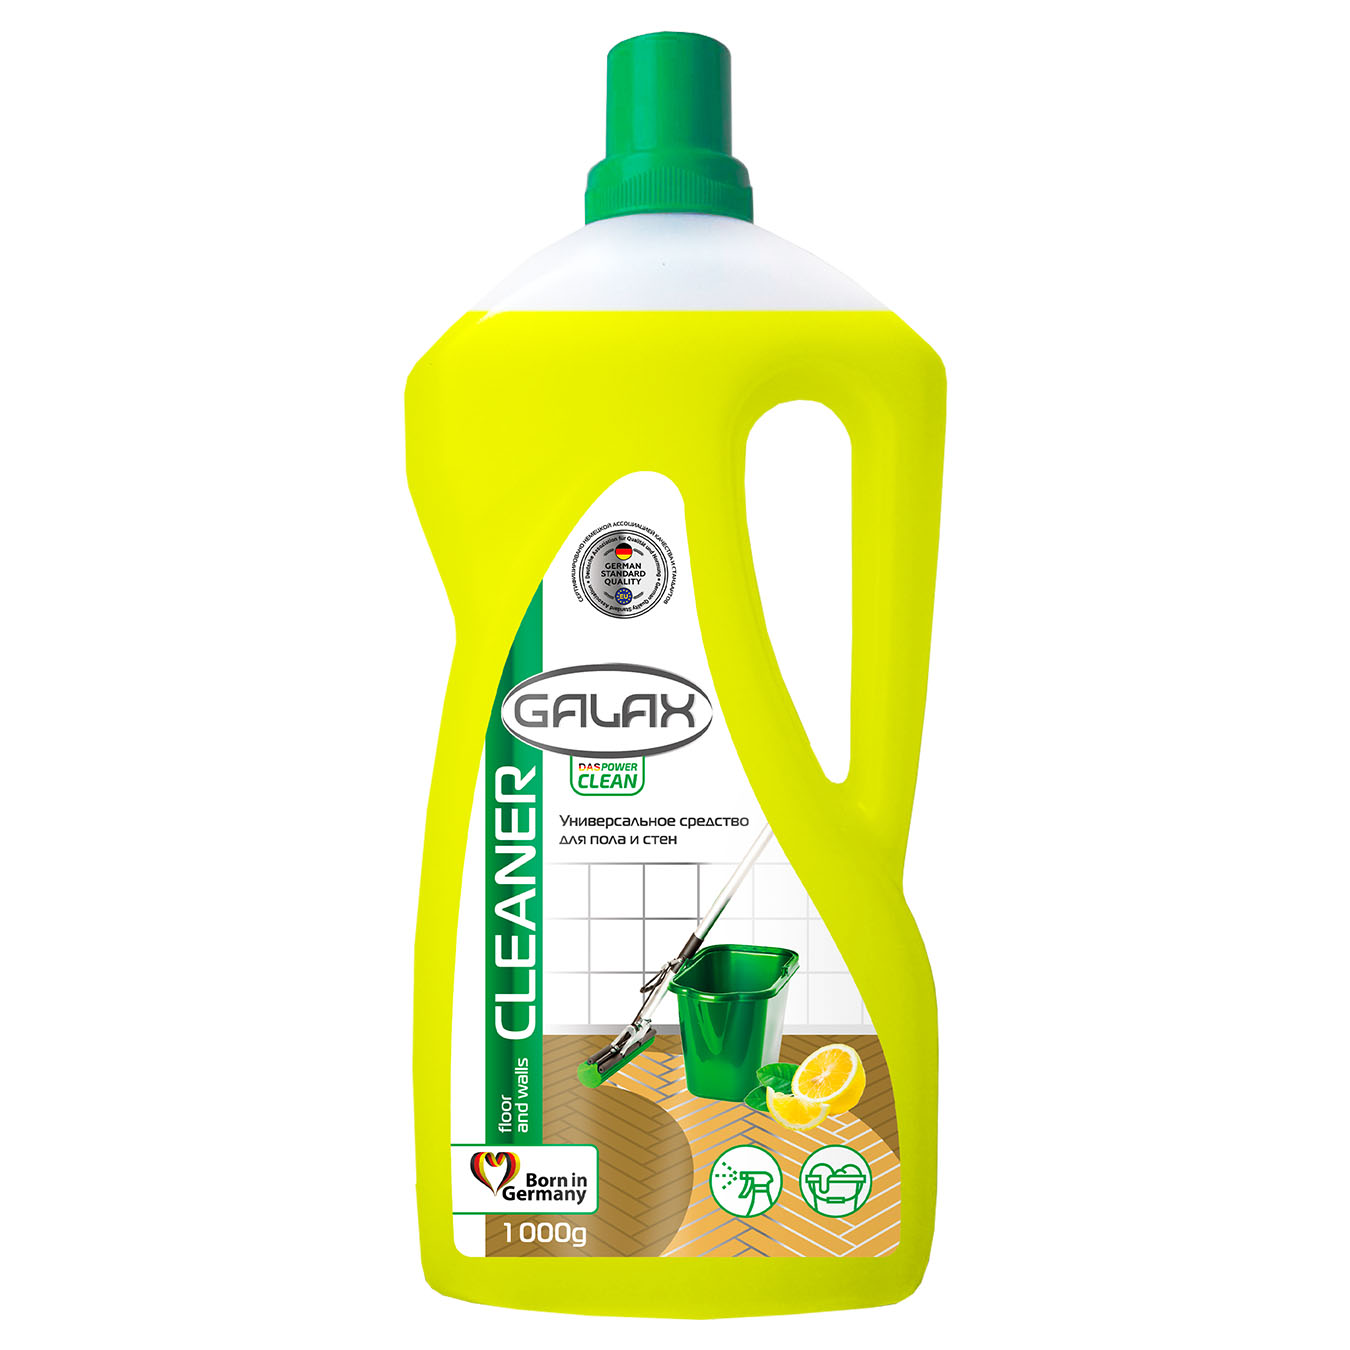 Galax das PowerClean universal detergent for floors and walls 1.1l